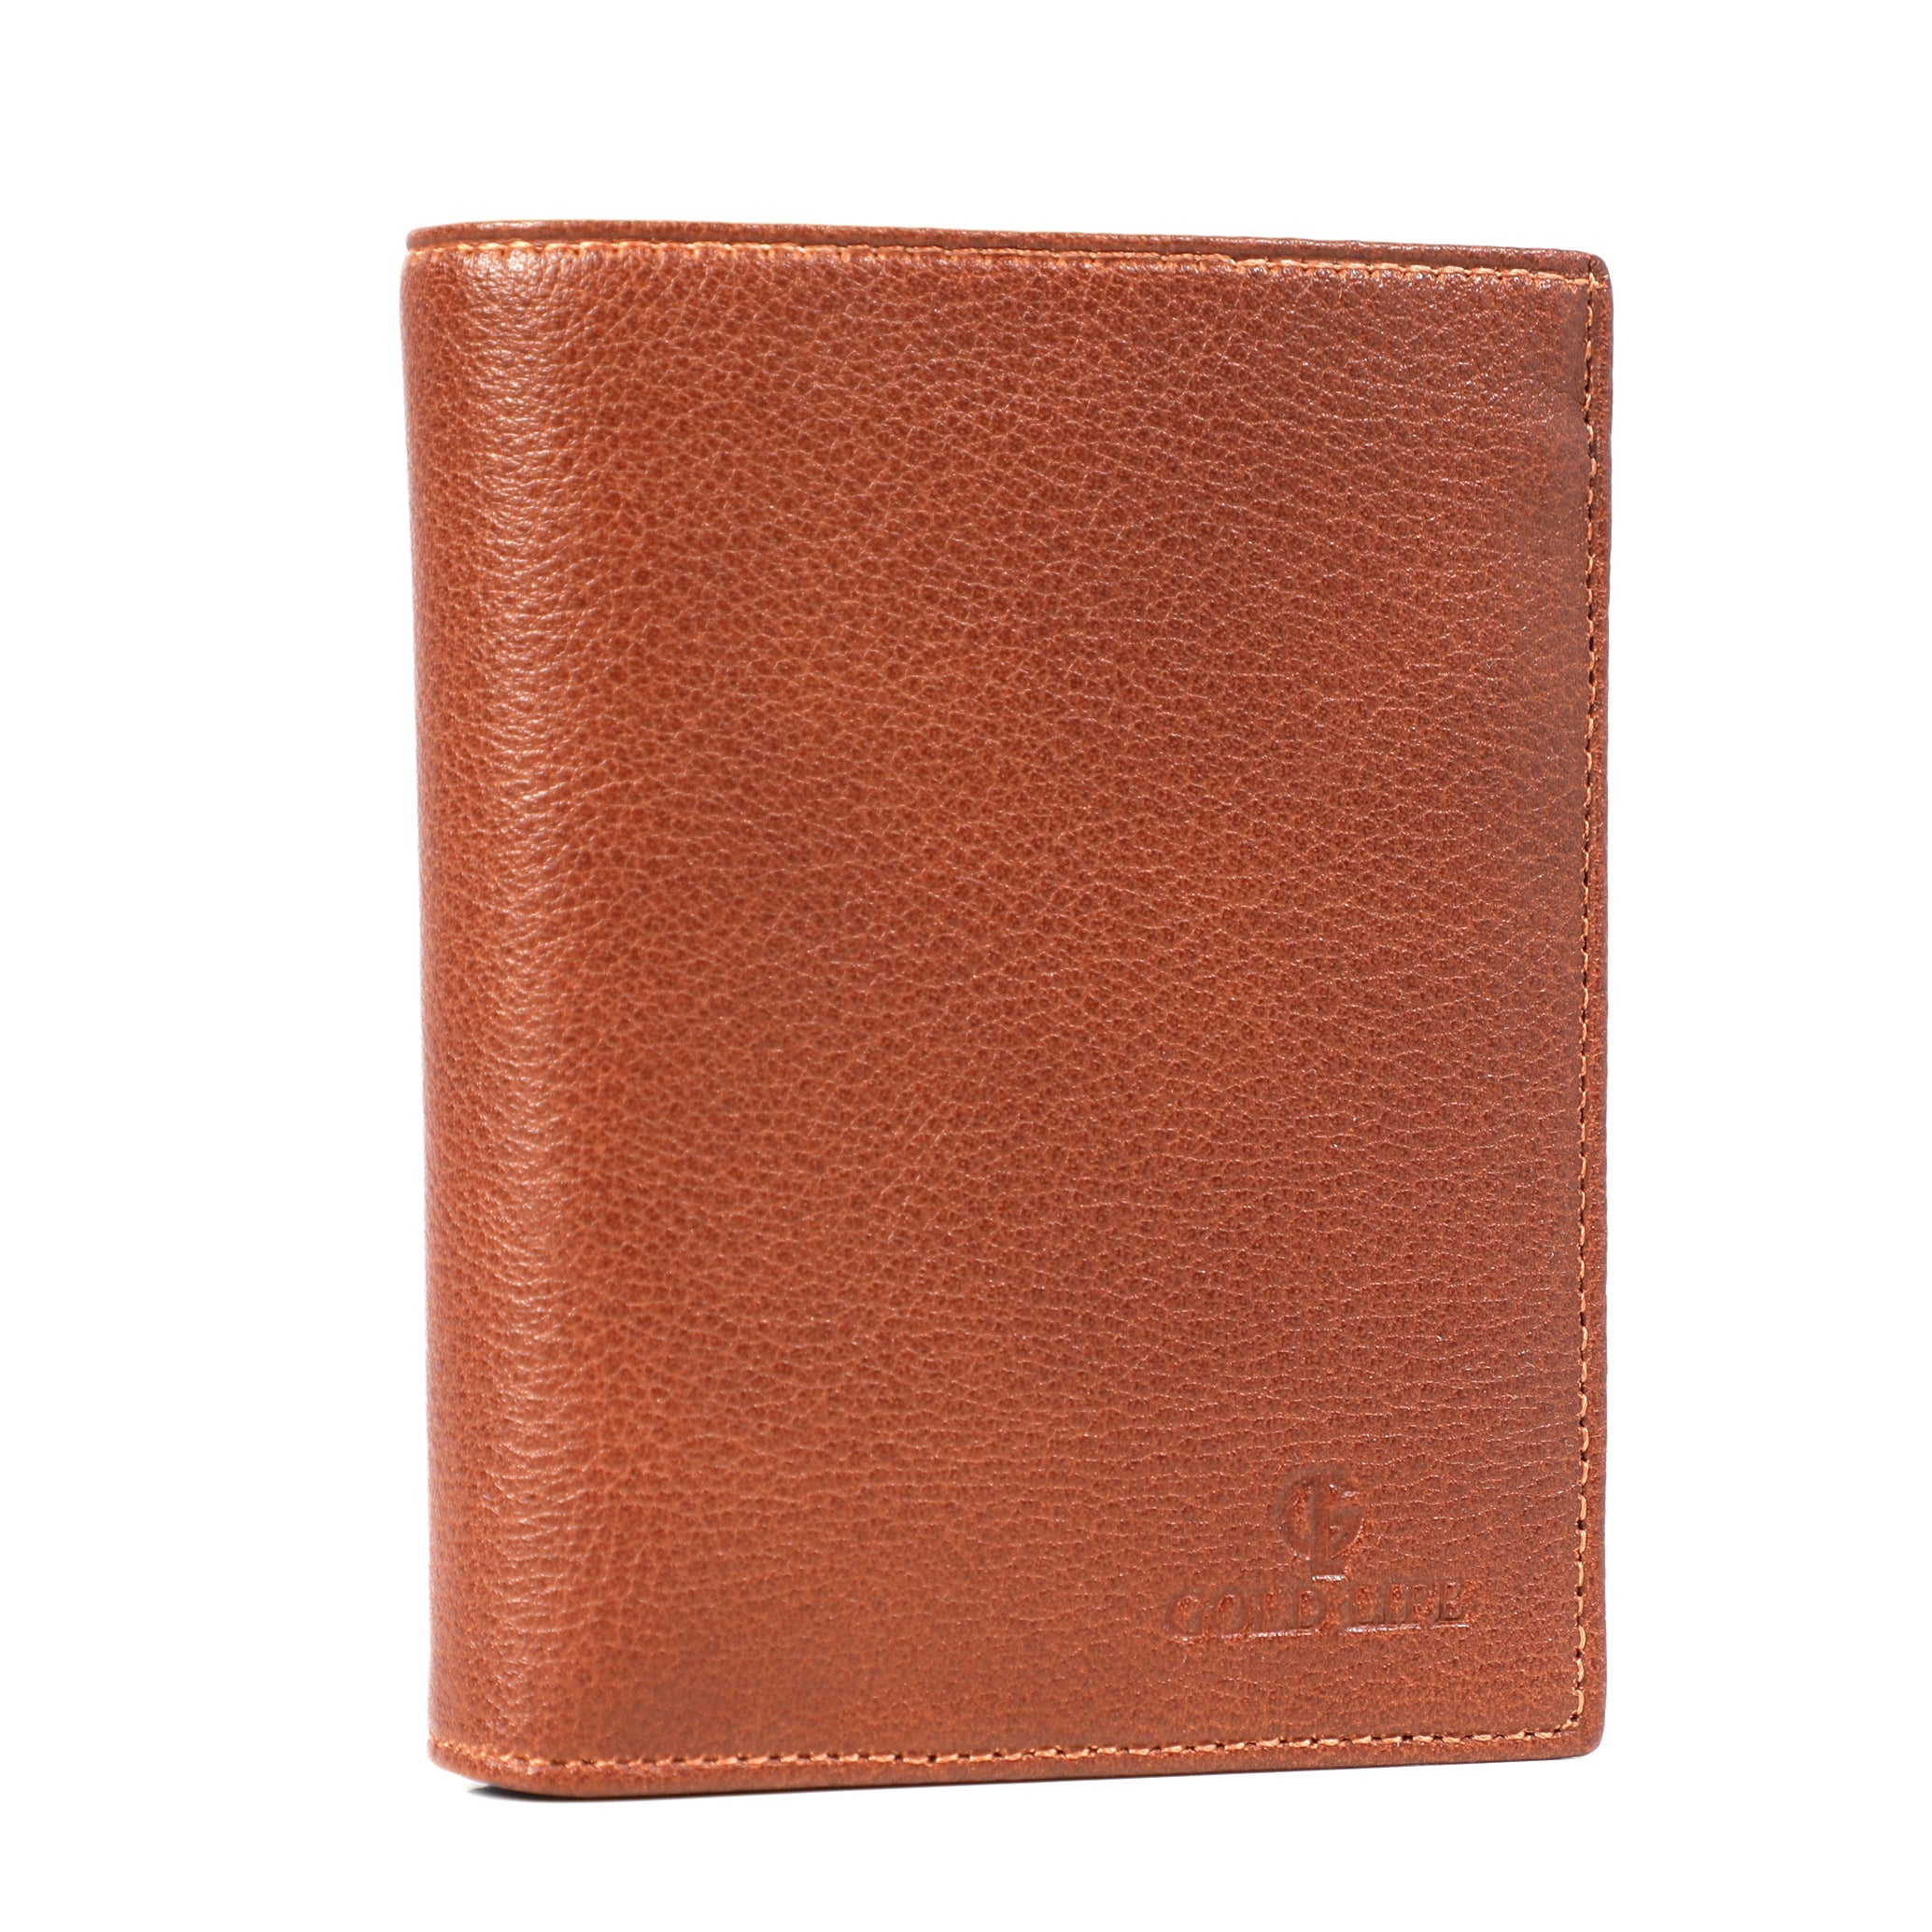 Genuine Leather Light Brown Wallet